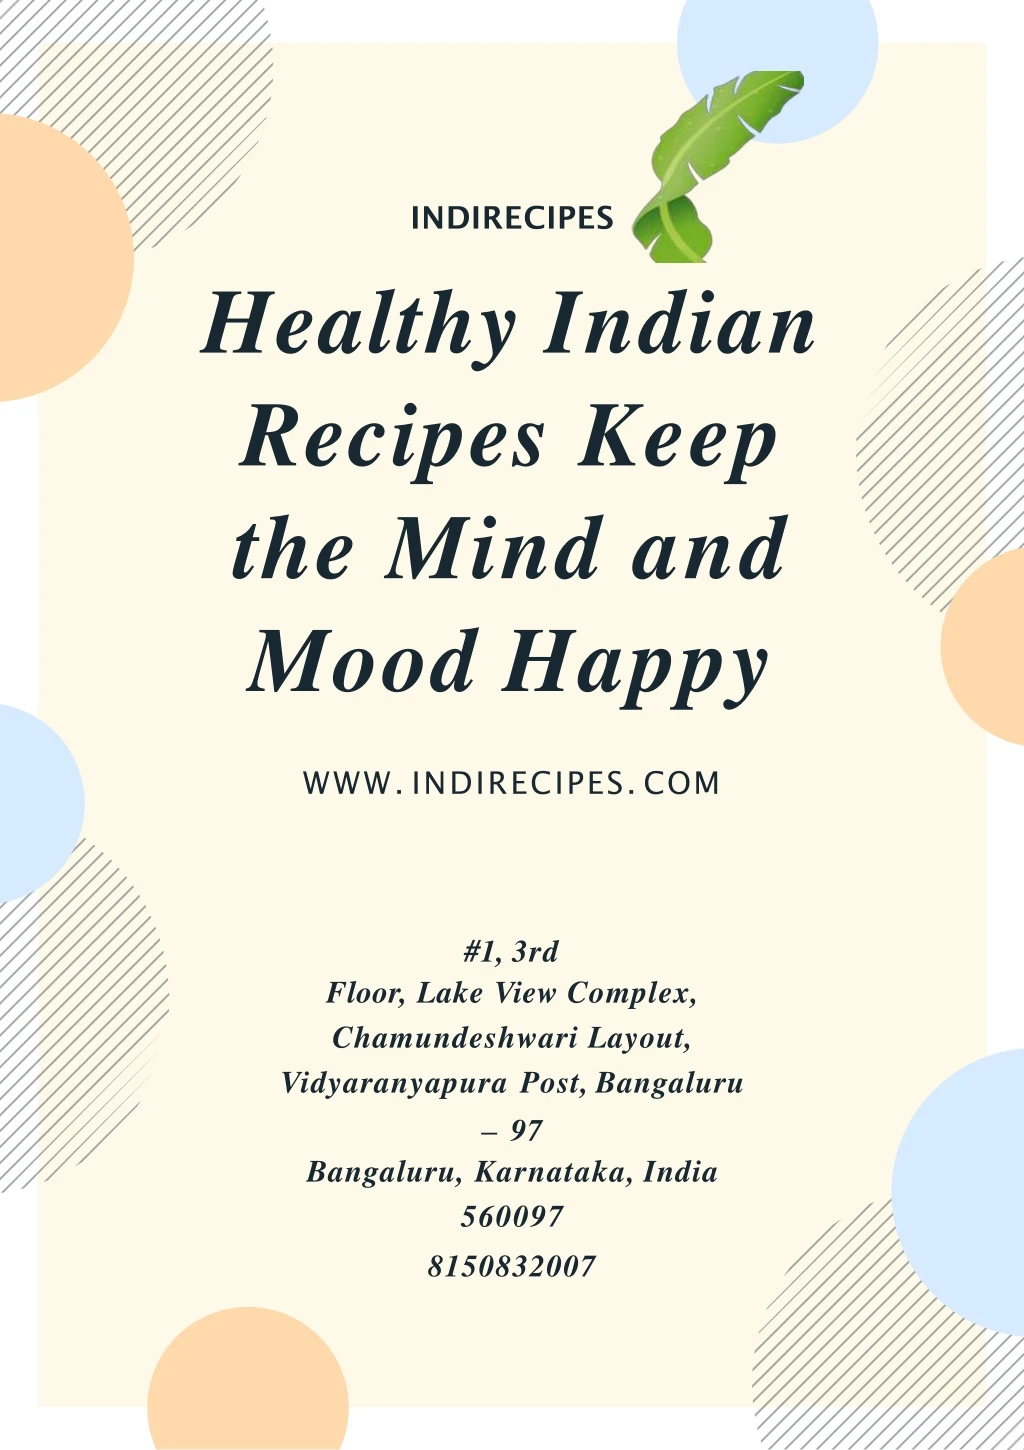 indirecipes healthy indian recipes keep the mind